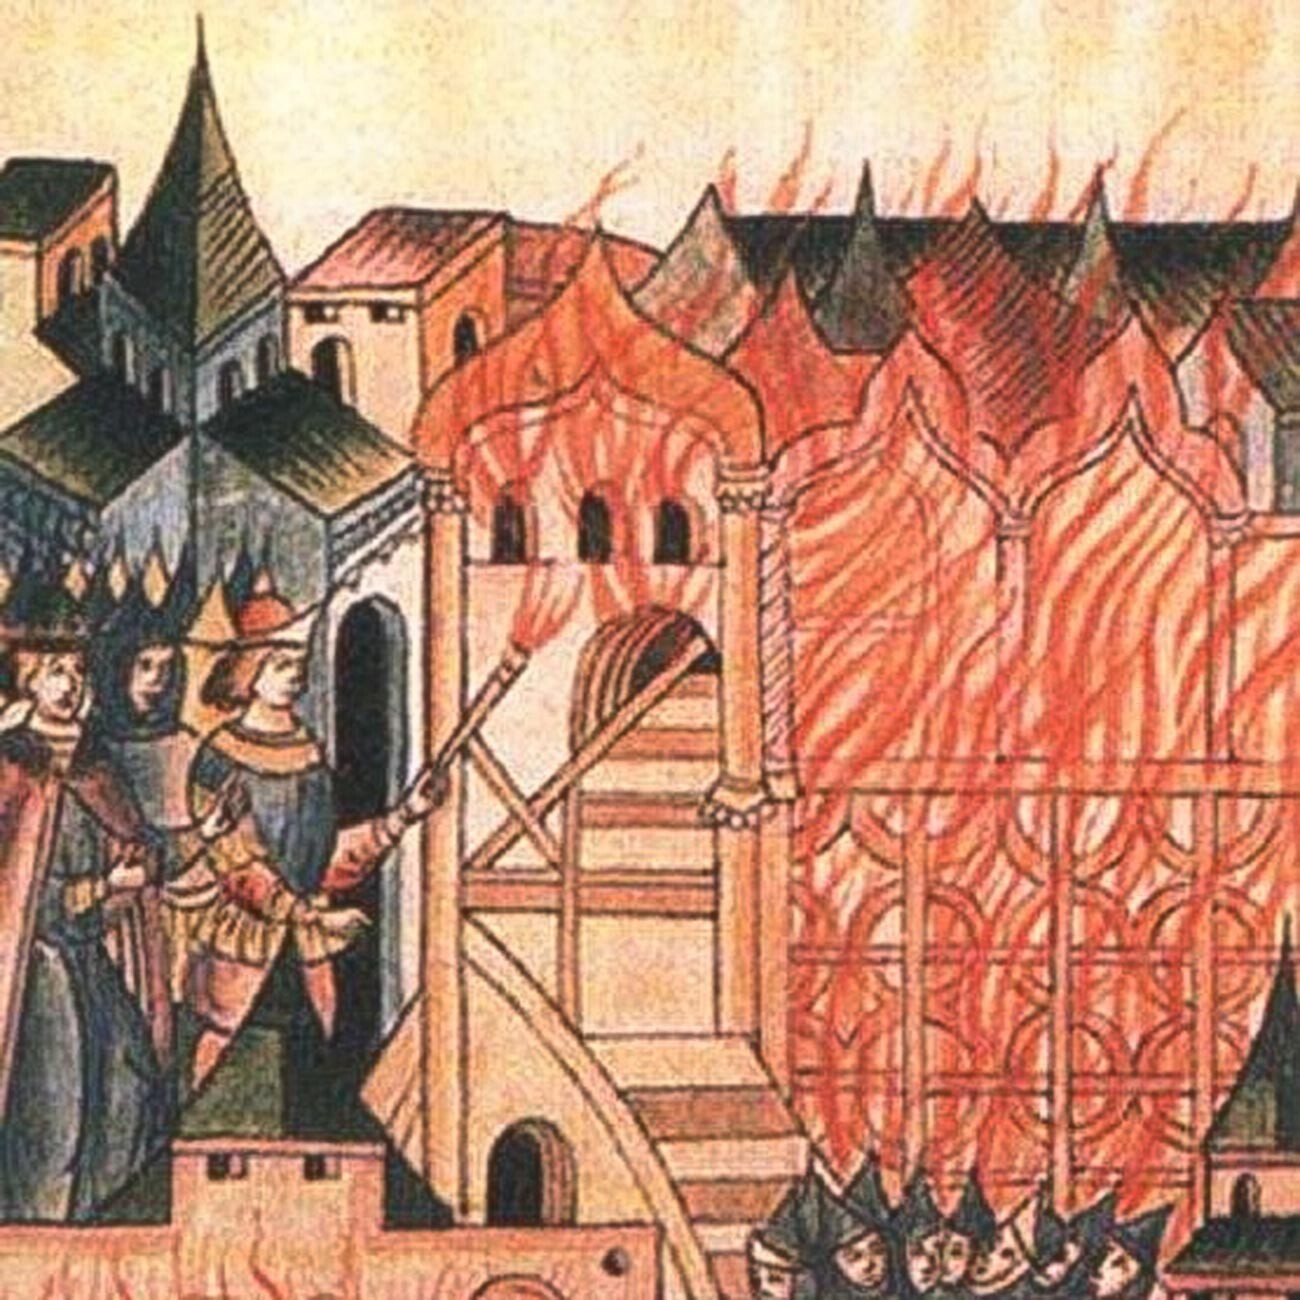 The Tver uprising of 1328 as seen in a Russian Illustrated Chronicle, 16th century. In this picture, the people of Tver are shown burning the palace with Cholkhan, Uzbeg Khan's cousin, inside it.